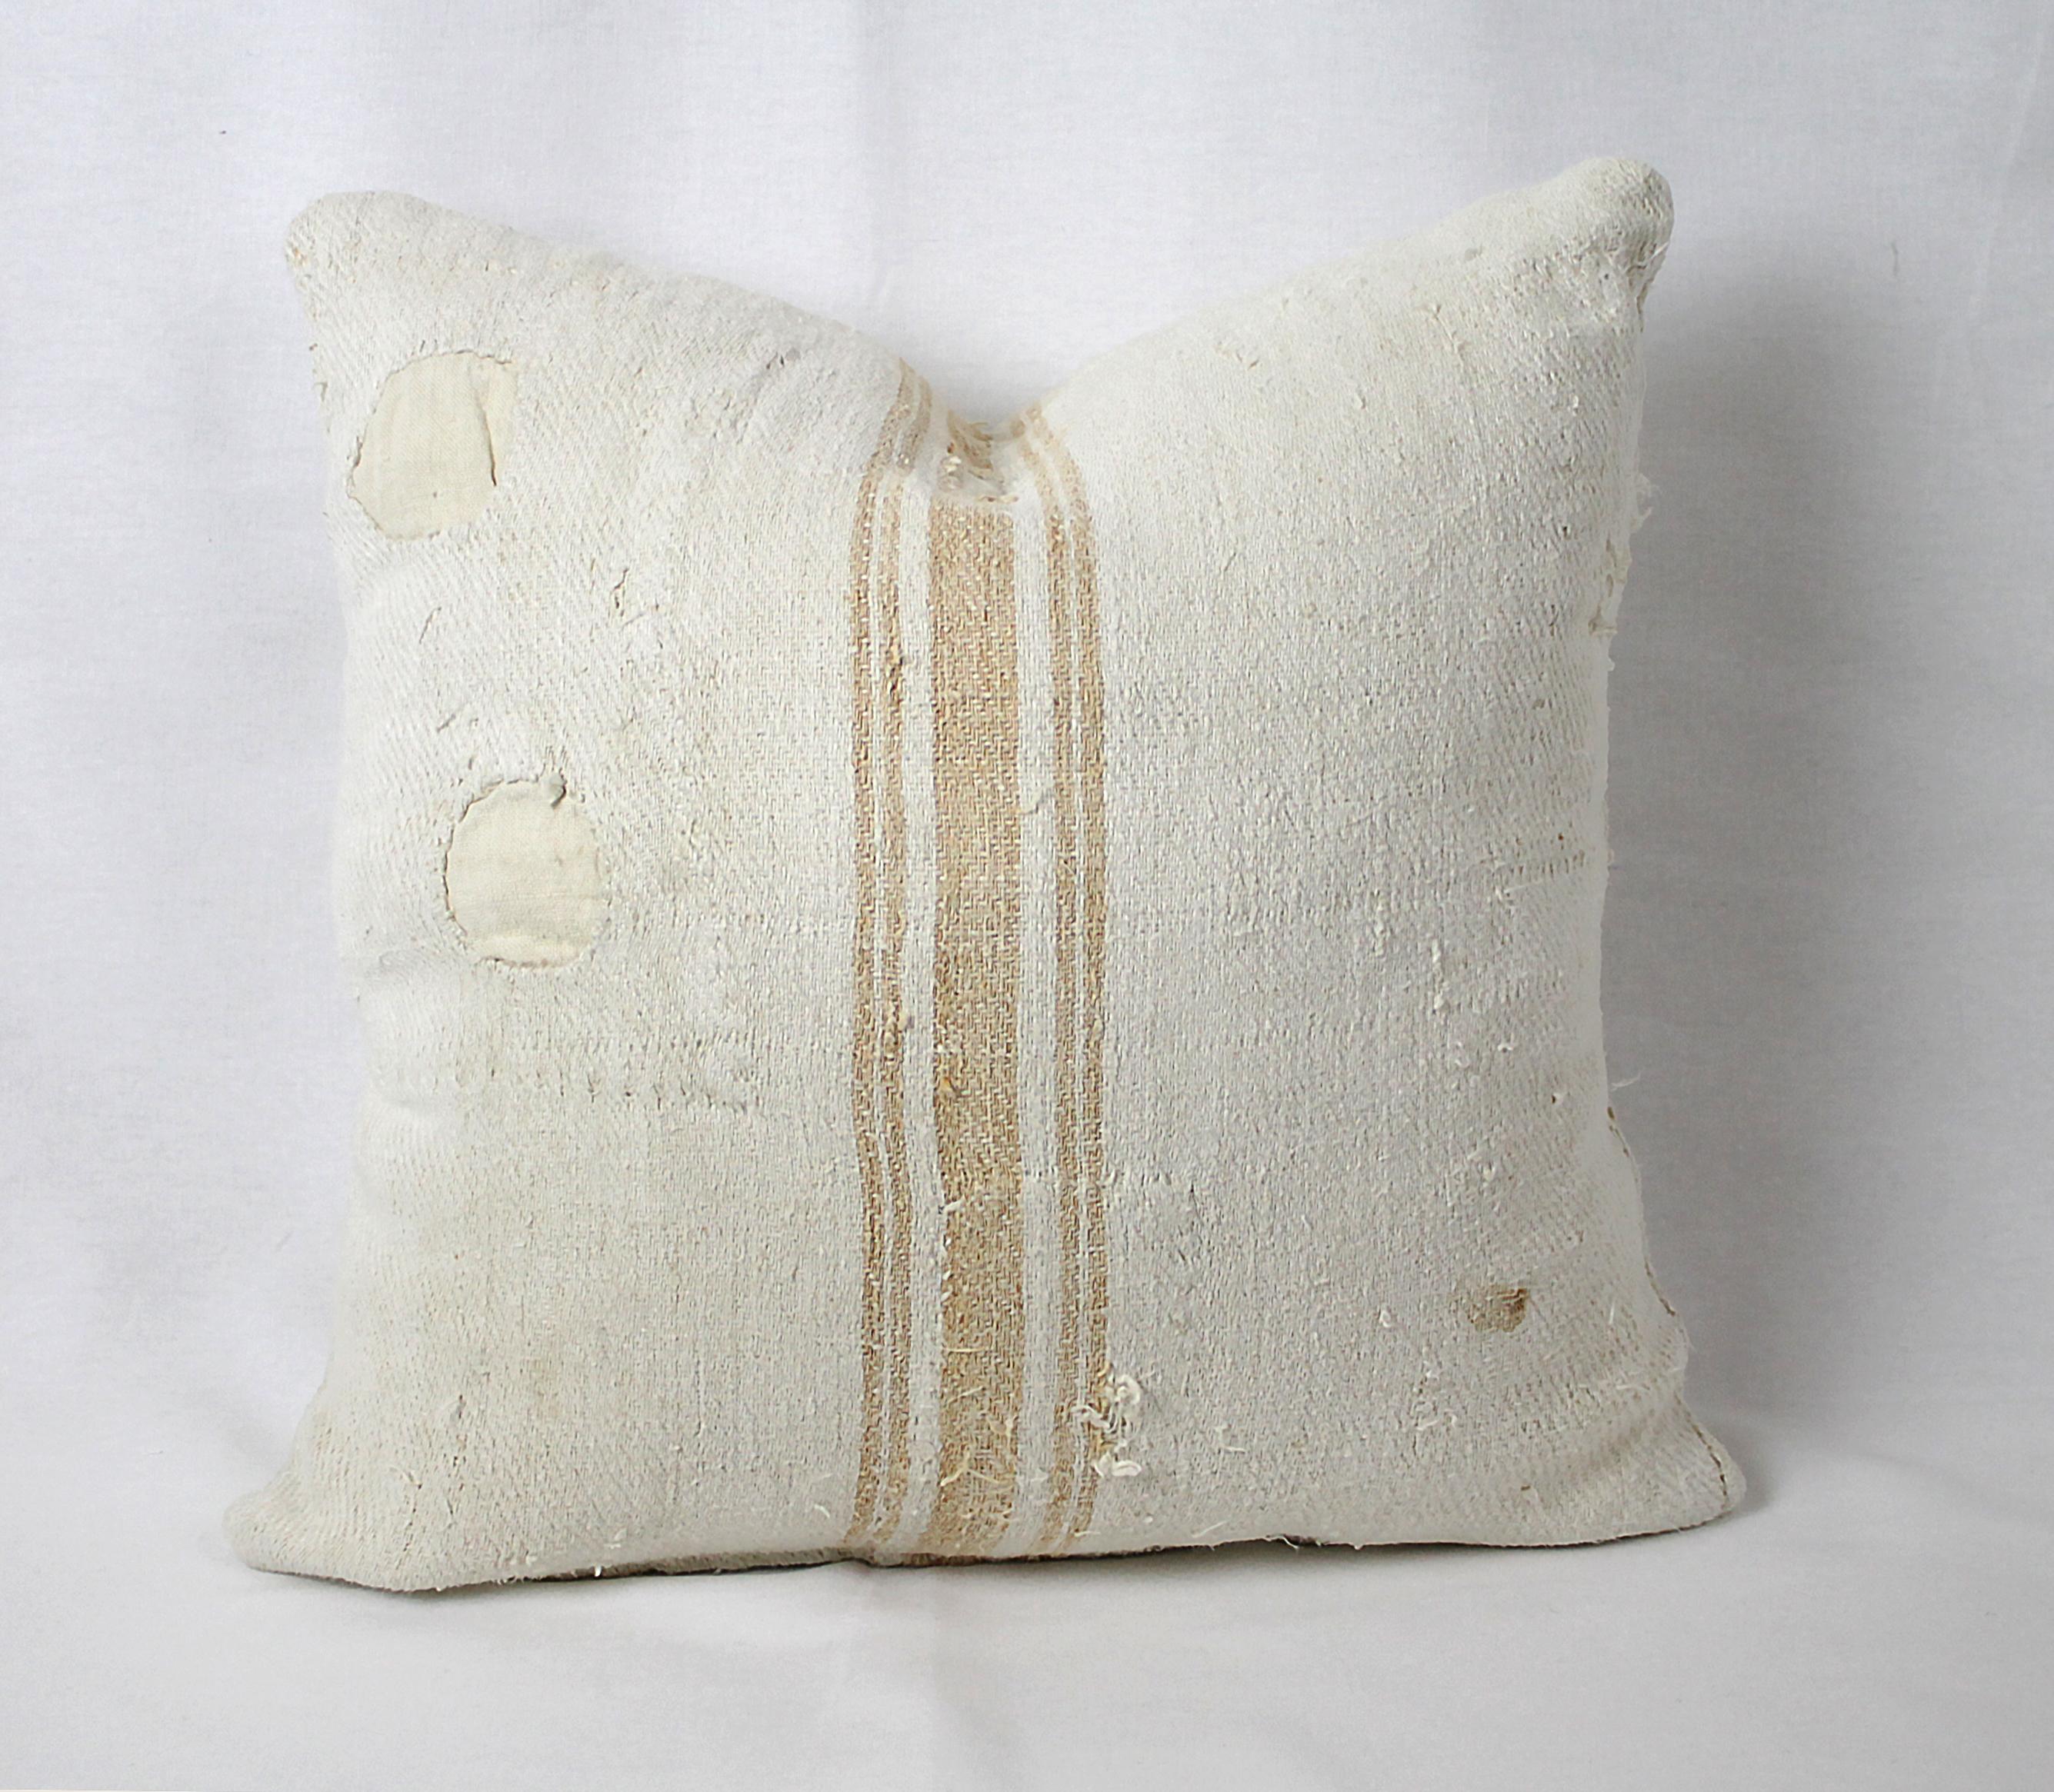 We make these pillows from old grain sacks from Eastern Europe. The pillow has a light orange triple stripe down the center, and the body is a medium oatmeal color. They are sewn with a zipper closure, and since we prewash all our vintage fabrics in